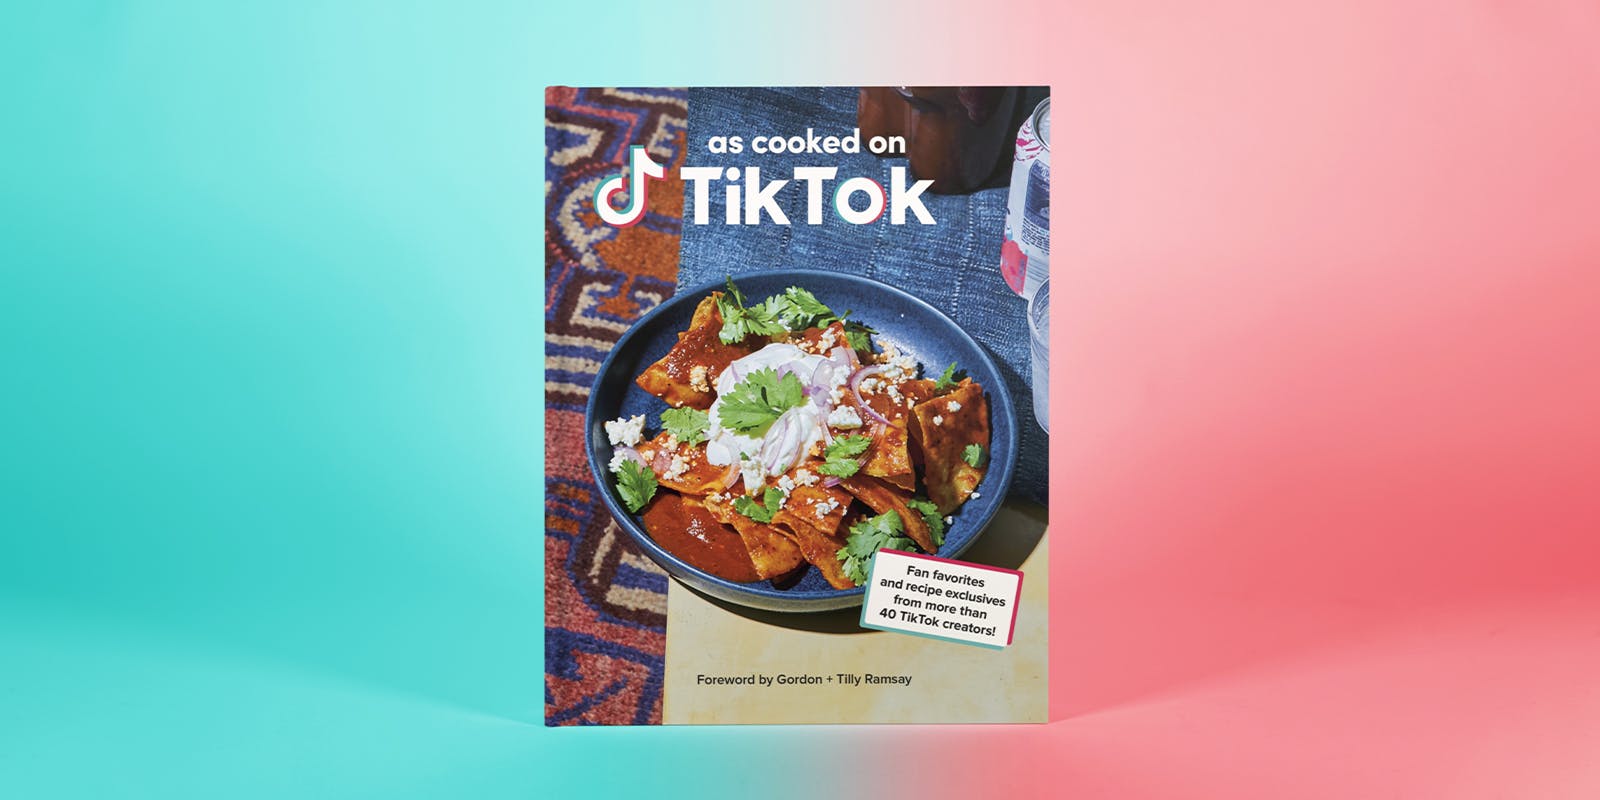 Get all of TikTok's best recipes in one book